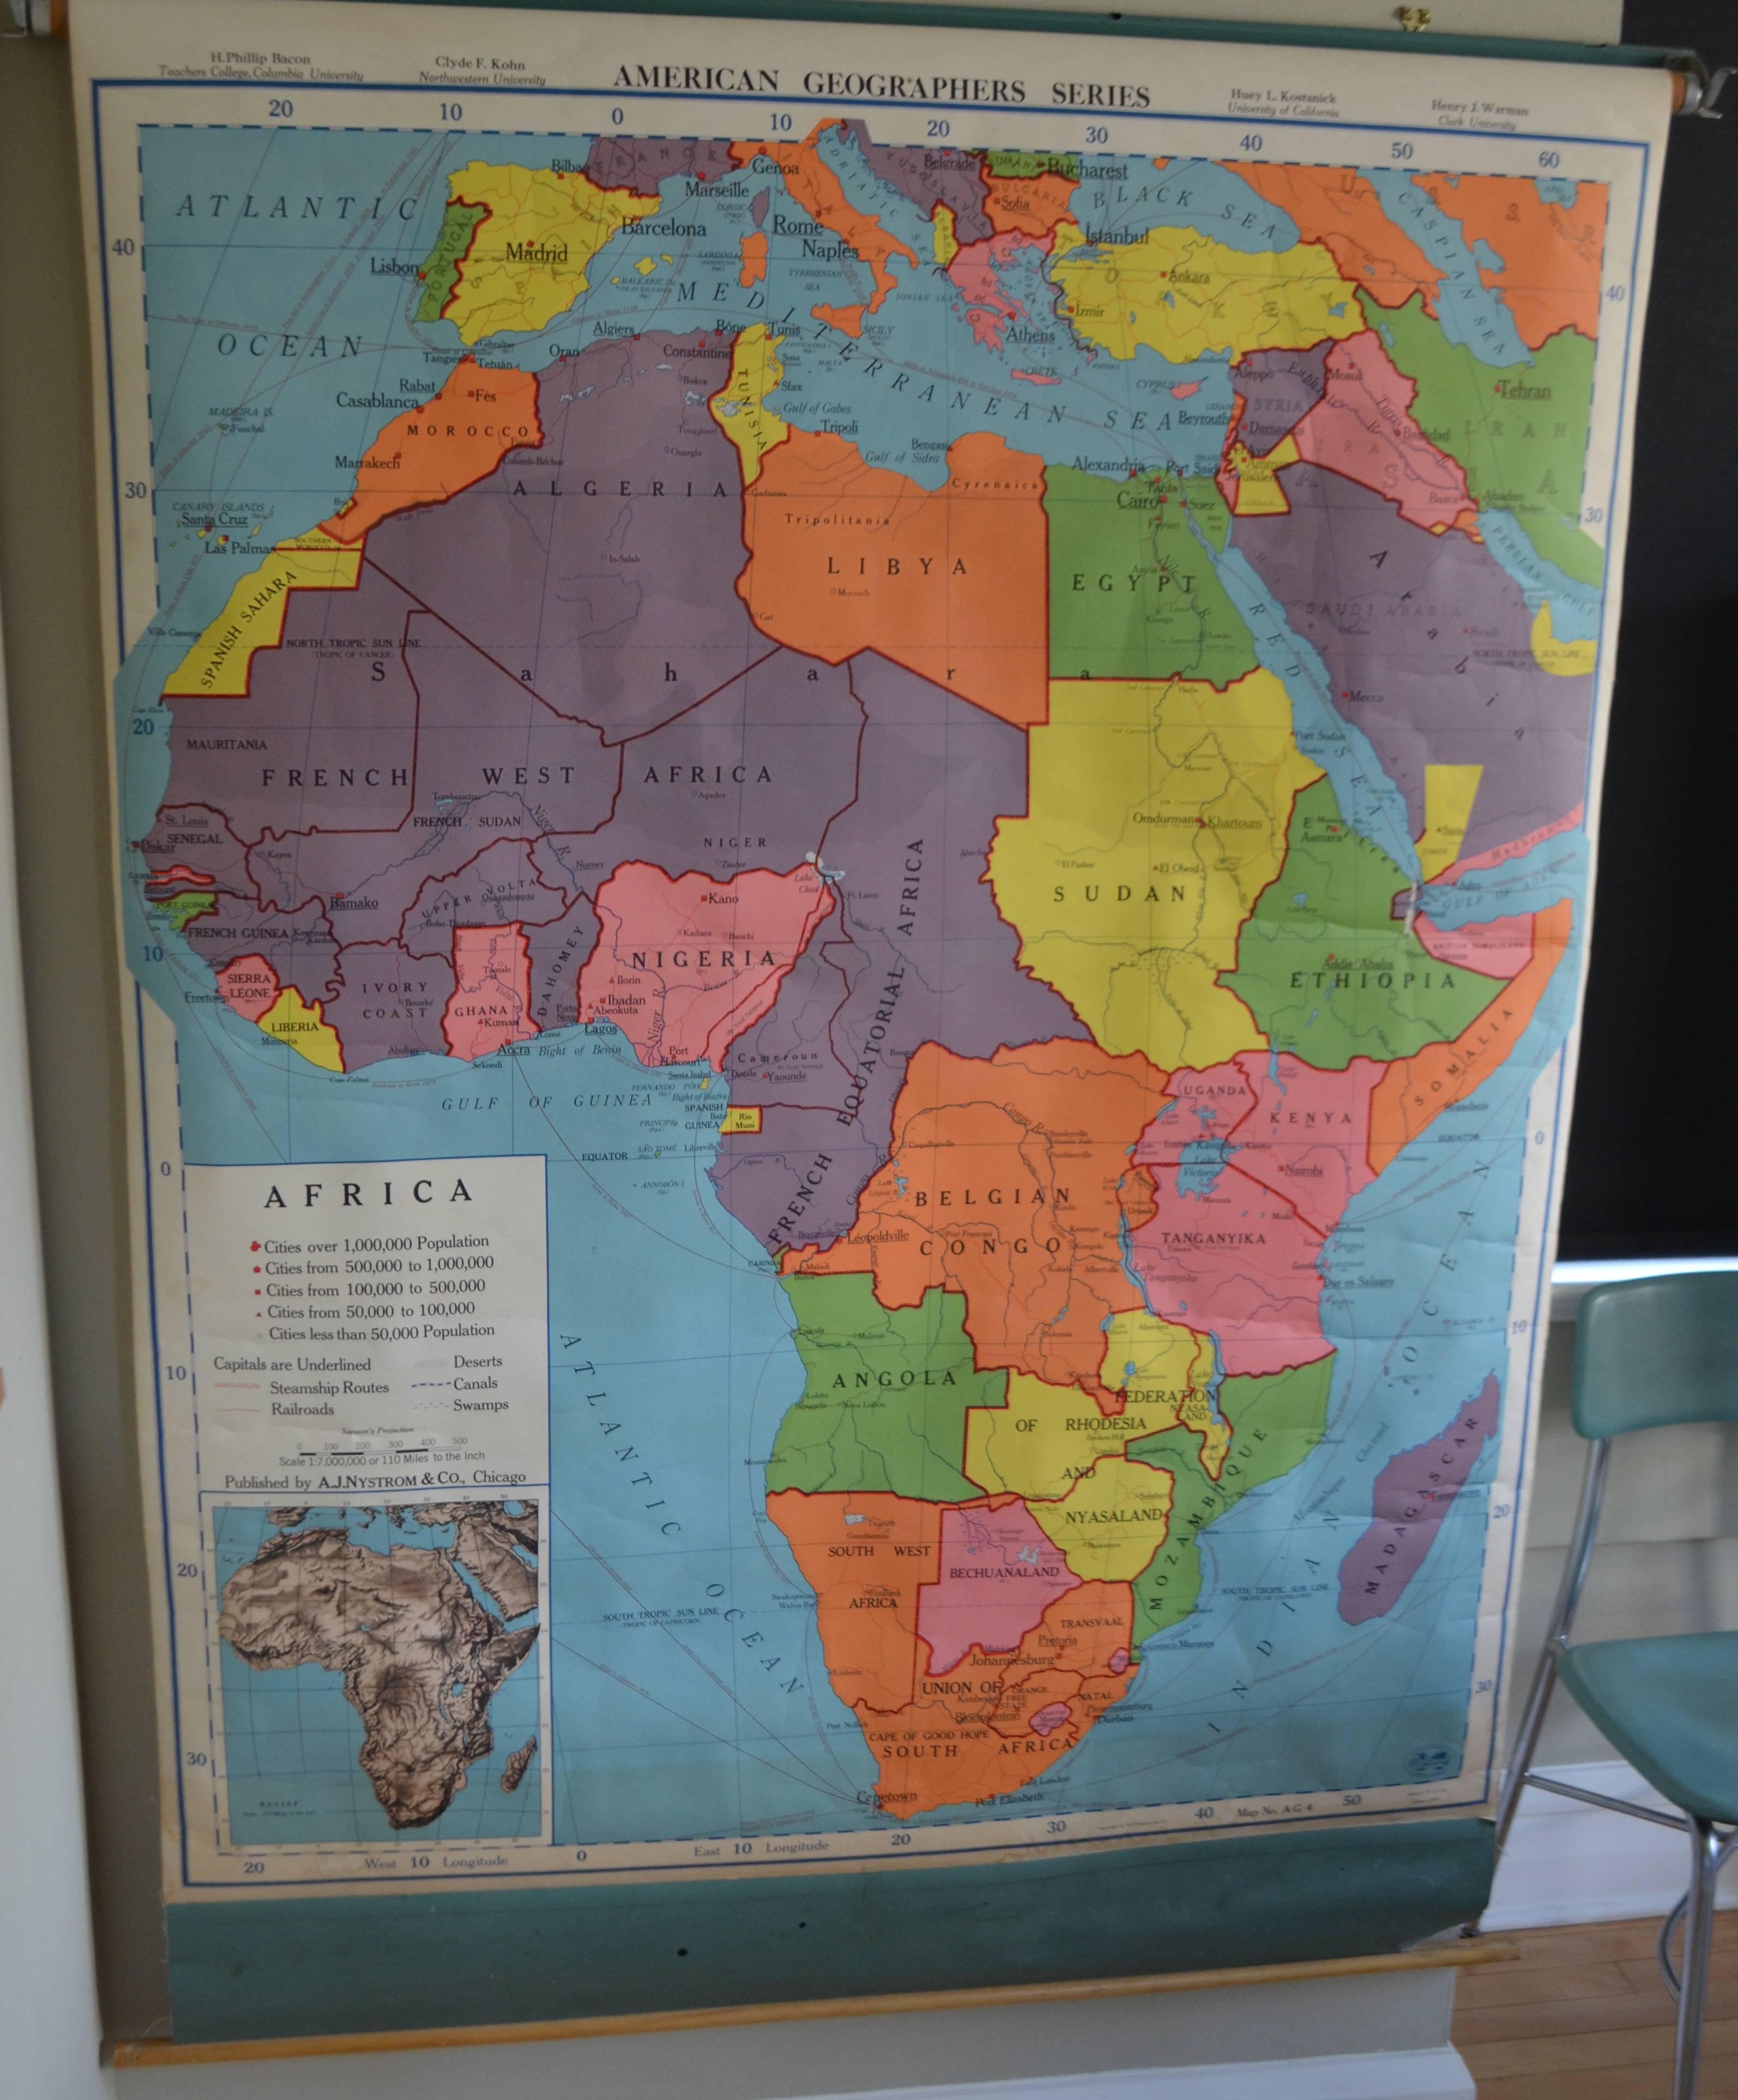 Classroom geography map of Africa, 1957 edition. Mounted on pulldown wooden roller with steel wall bracket. The colors on this map are rich, vivid and as compelling to behold as the African continent itself. The Dark Continent illuminated in